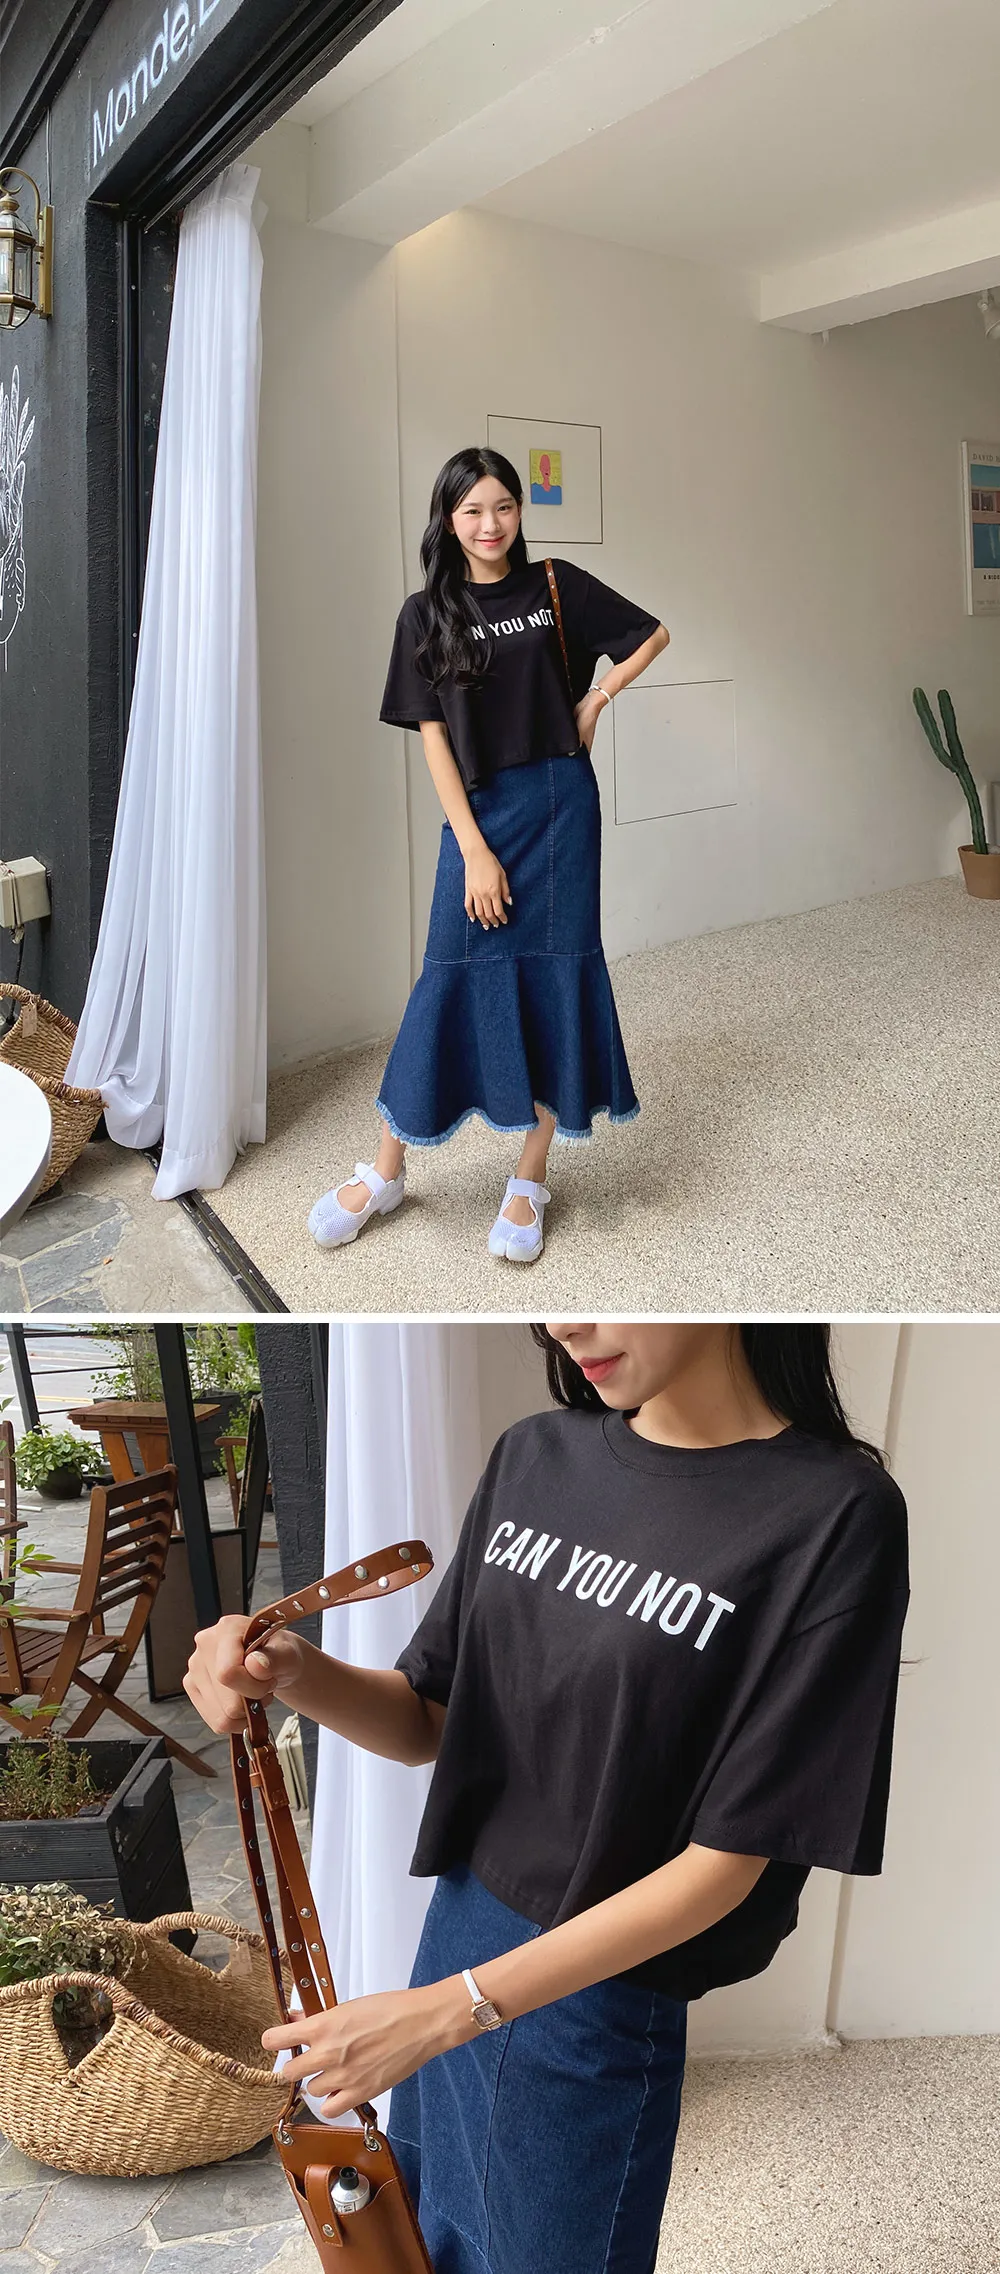 CAN YOU NOTクロップドTシャツ・全2色 | 詳細画像10